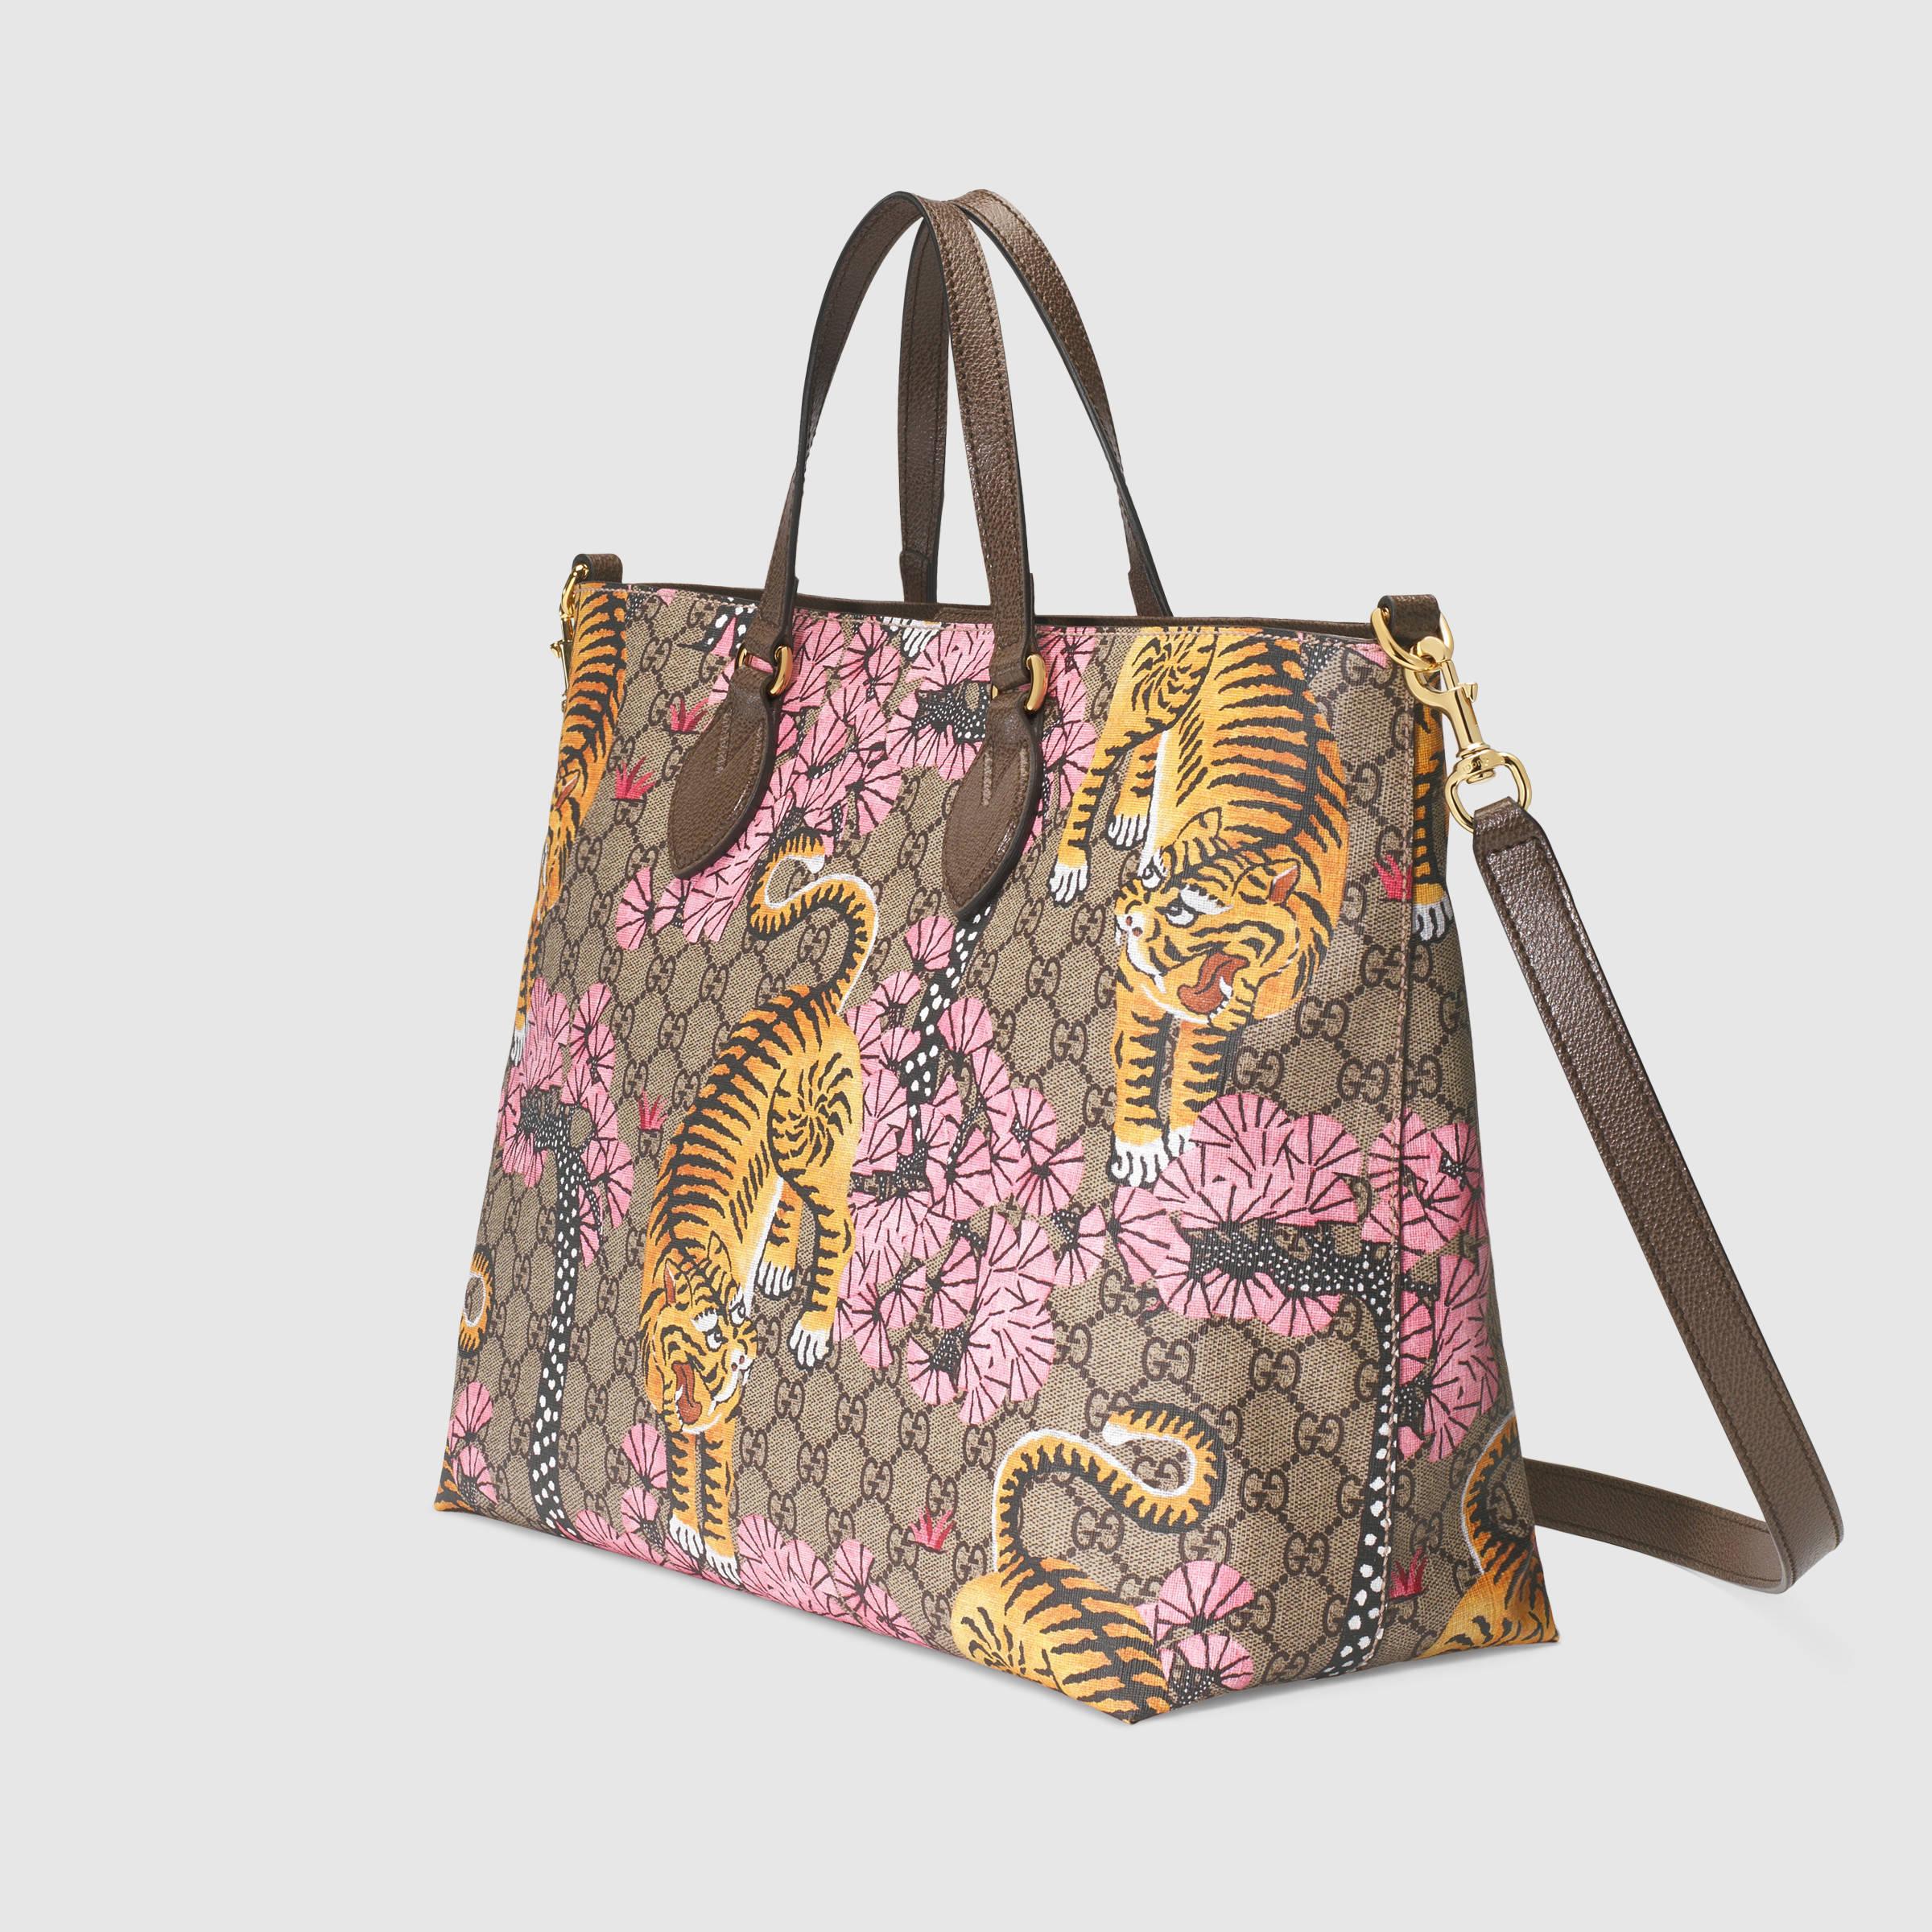 Lyst - Gucci Bengal Soft Gg Tote